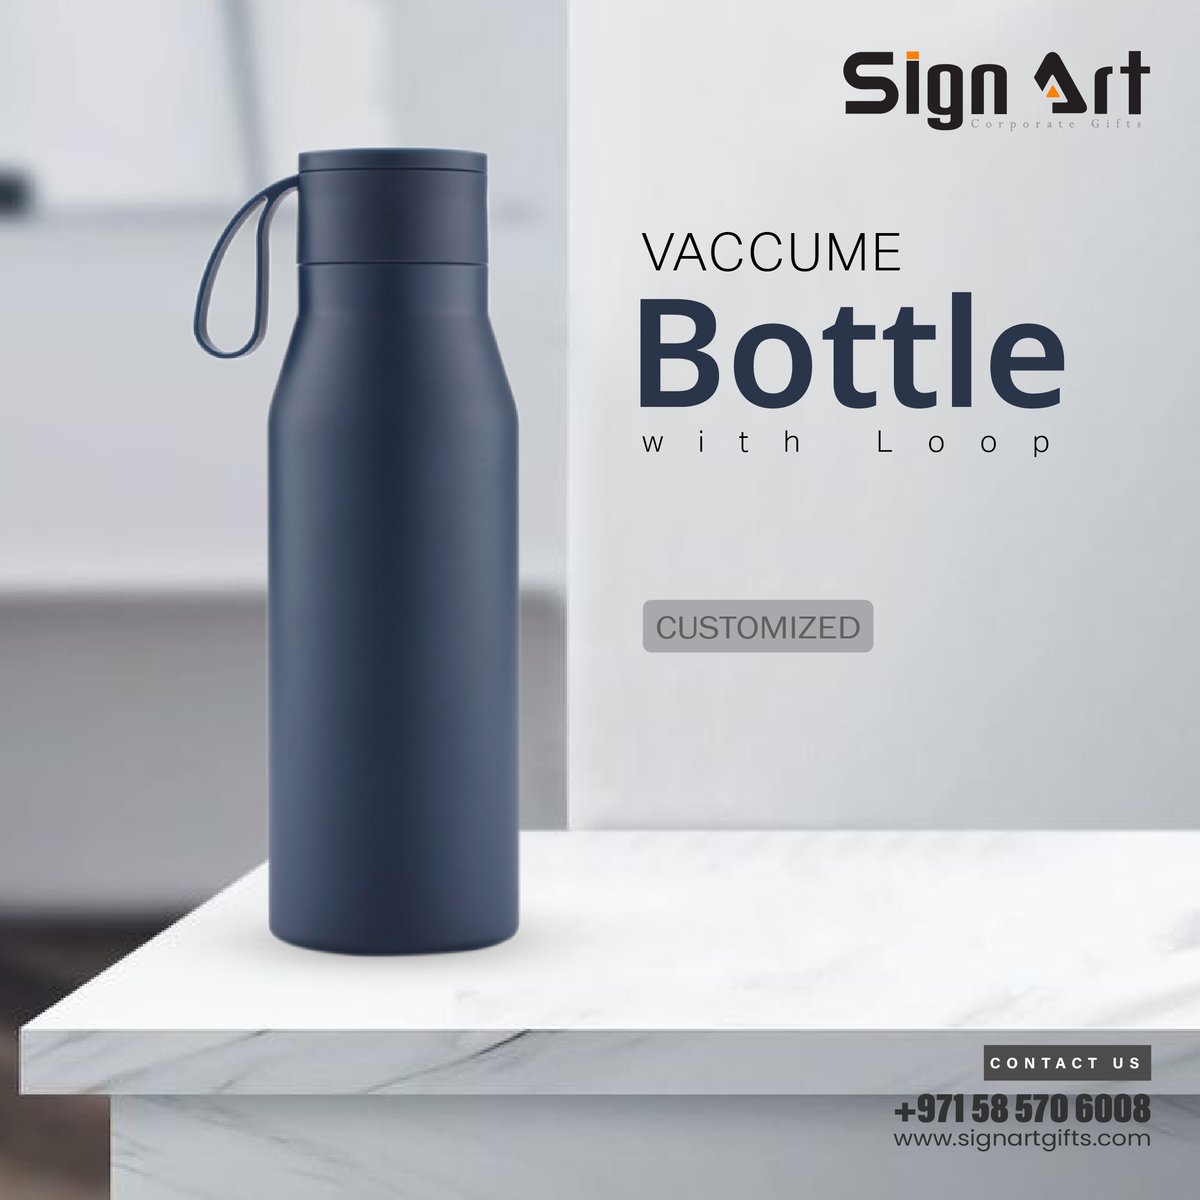 Vacuum Bottle with Loop
WhatsApp: 058 570 6008

Learn more: signartgifts.com

#customized #customizedgifts #promotionalproducts #bottles #VacuumBottle #screenprinting #promotionalgifts #giftsindubai #officebranding #printingservices #dubaiprinting #giftsupplie